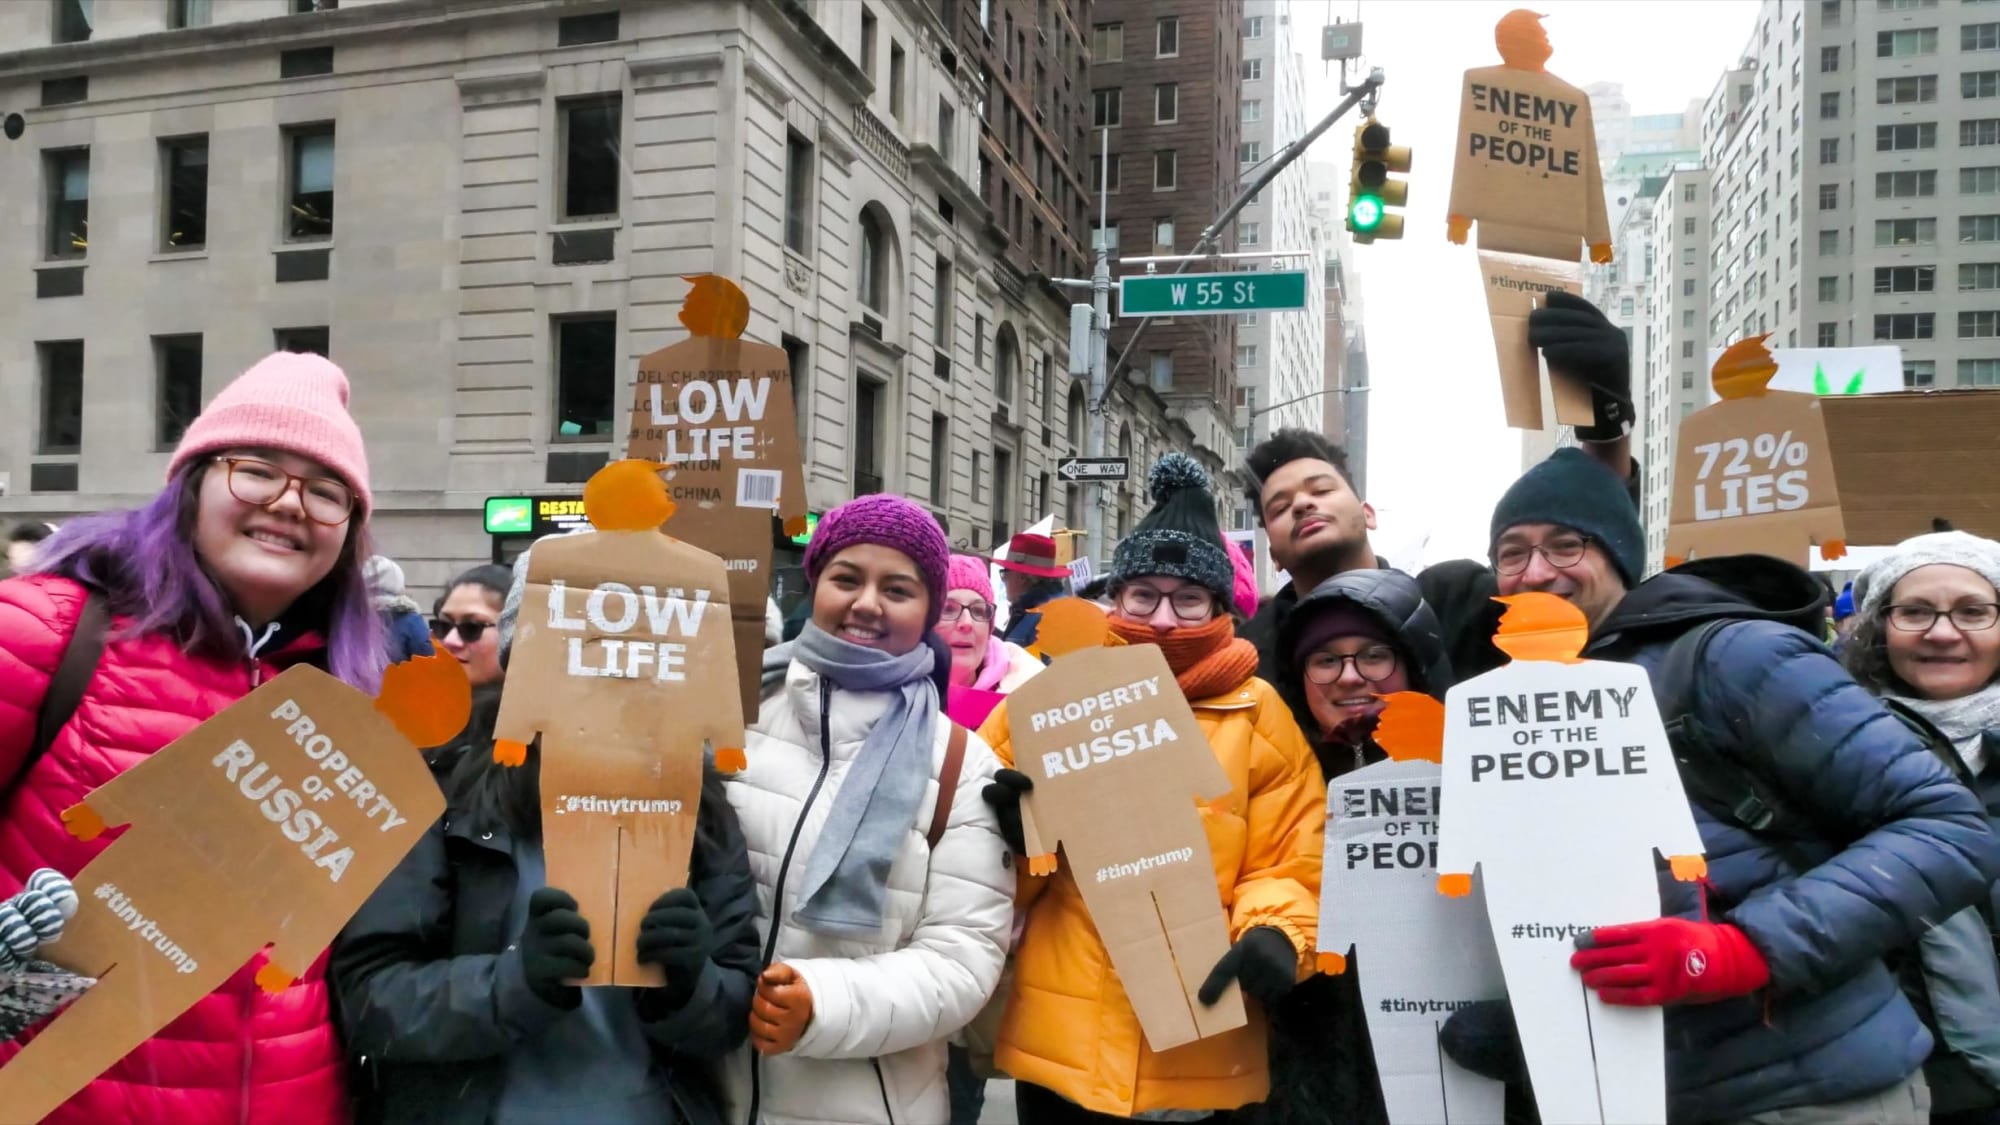 Group photograph 8 people, including the artist, holding up tiny trumps during the protest march, in a NYC intersection. In the background the street sign denoting 55th street is visible.